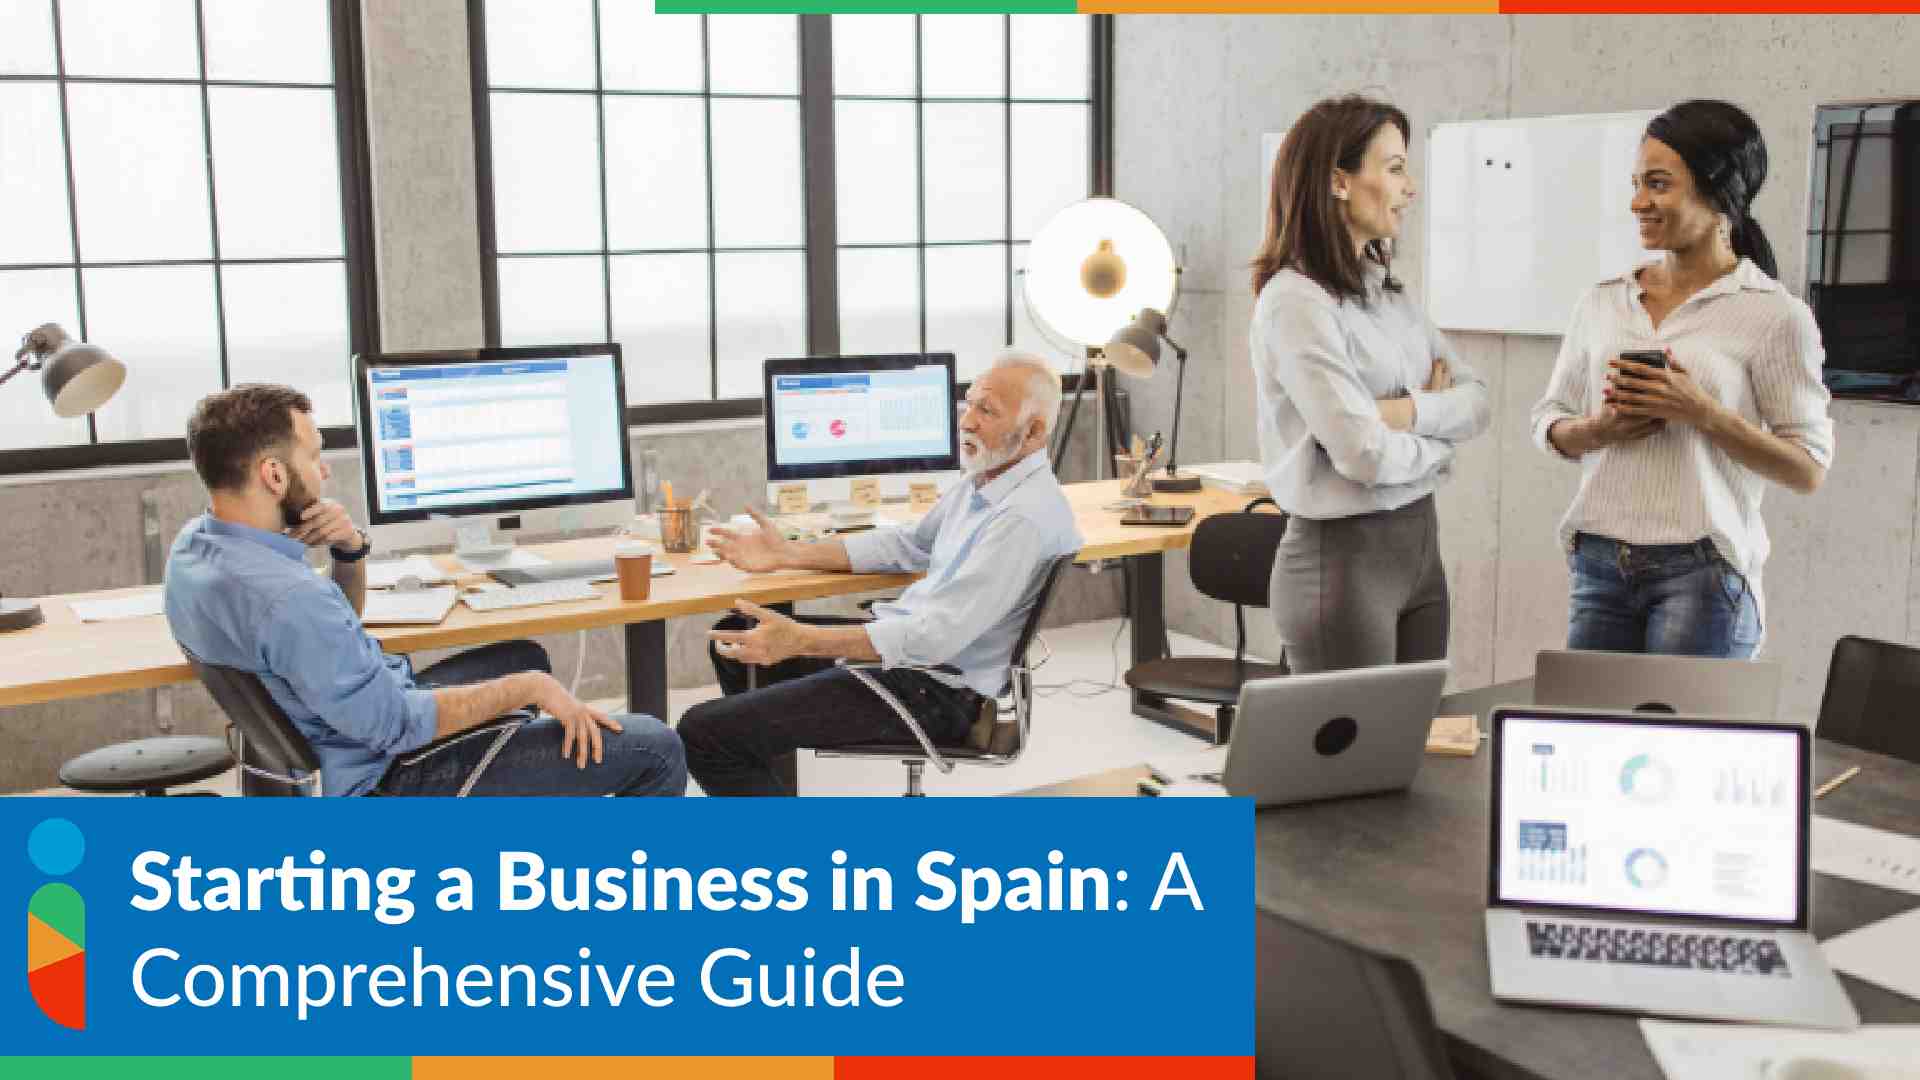 Starting a Business in Spain: A Comprehensive Guide